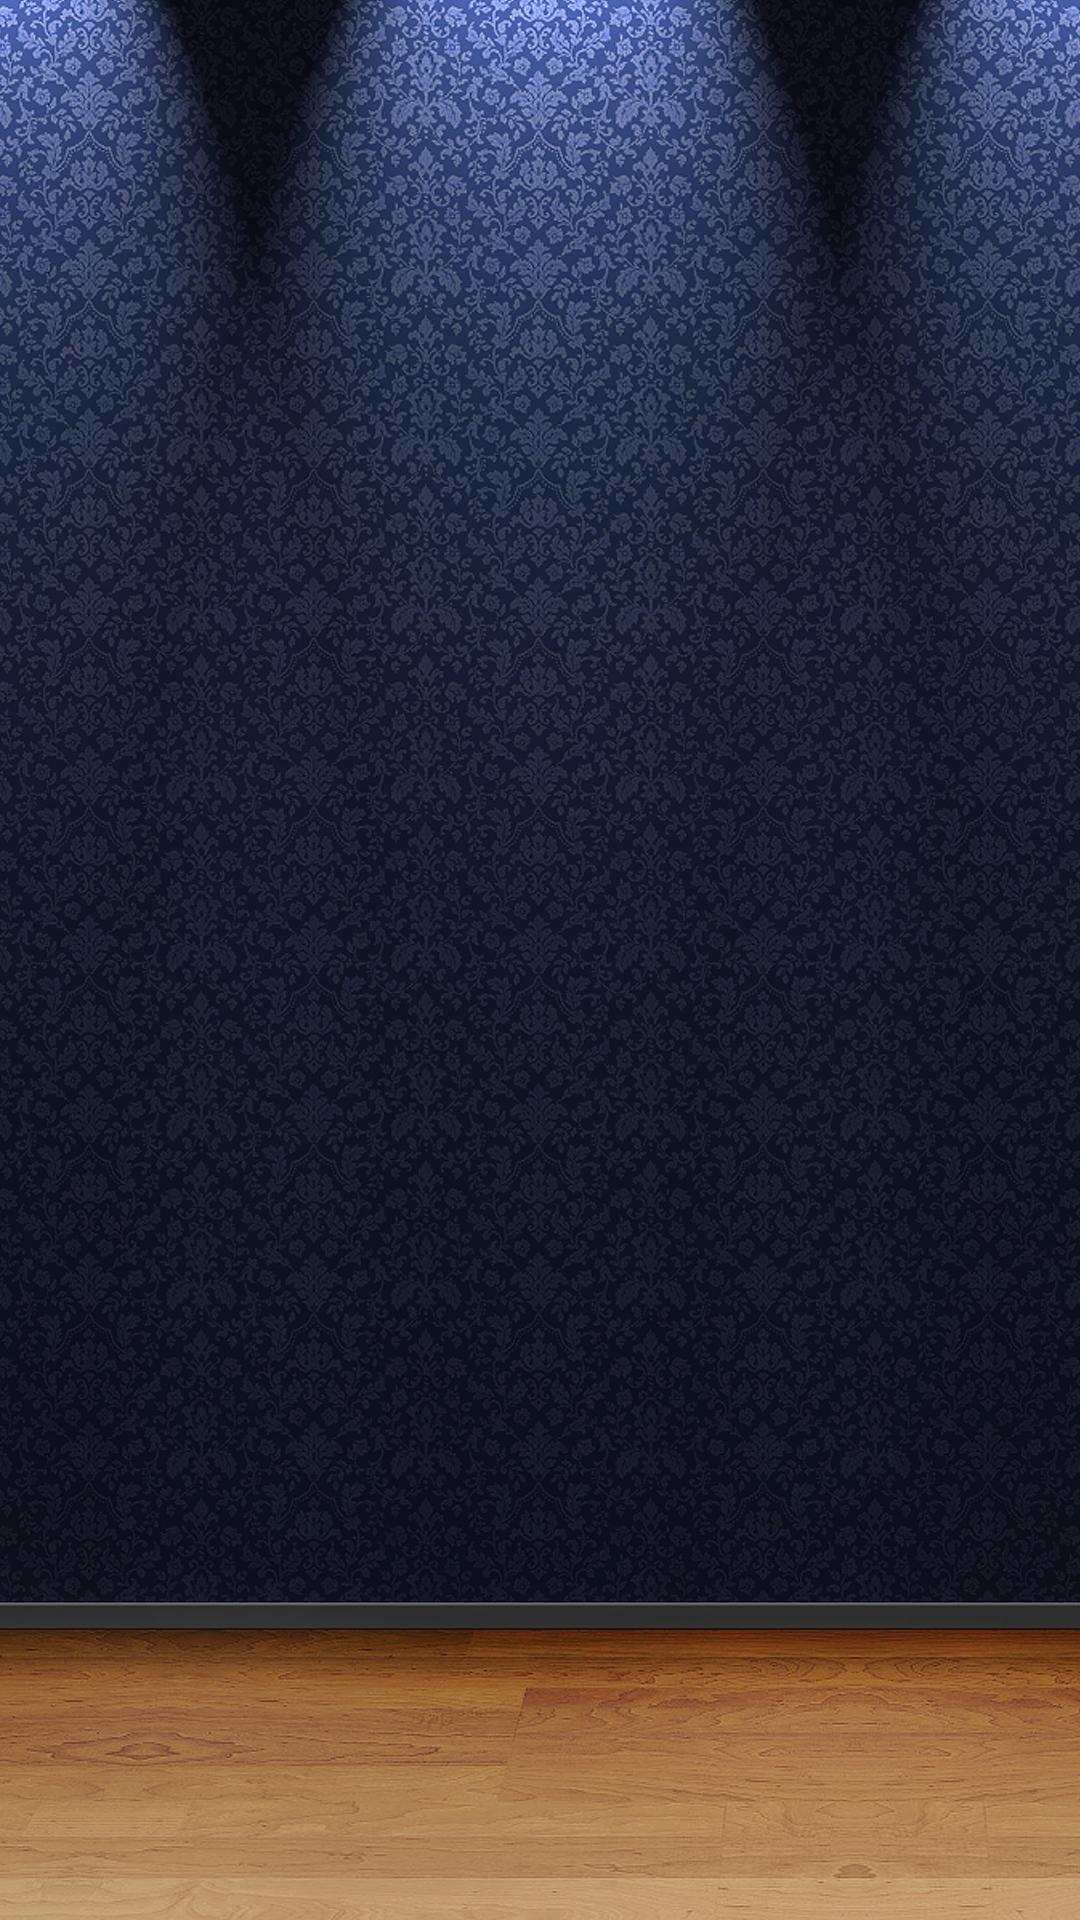 iPhone Wallpaper Blue Leather